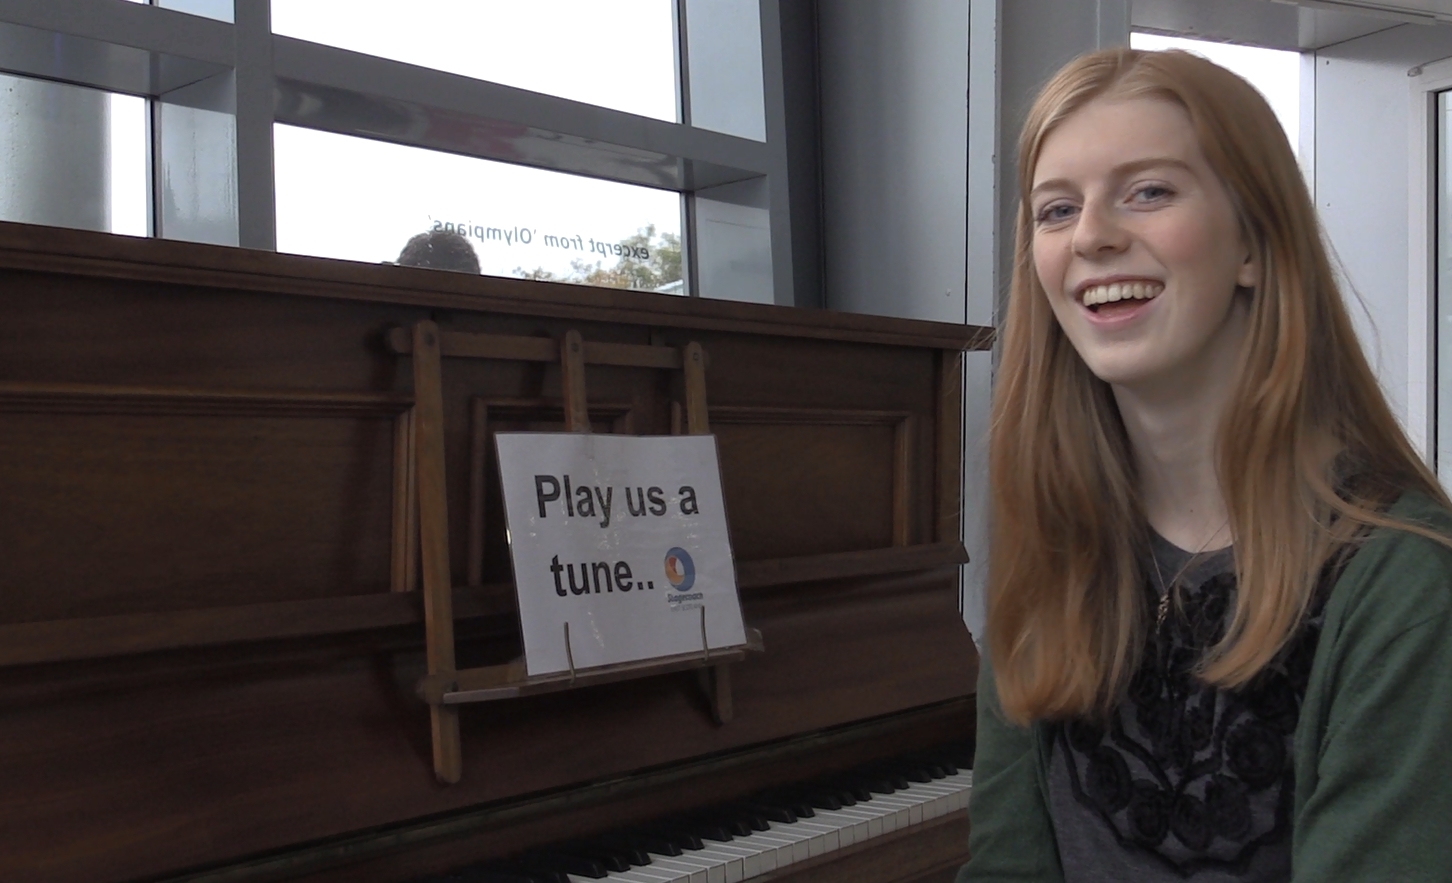 Evie Kerr is an classical pianist on scholarship at the University of St Andrews